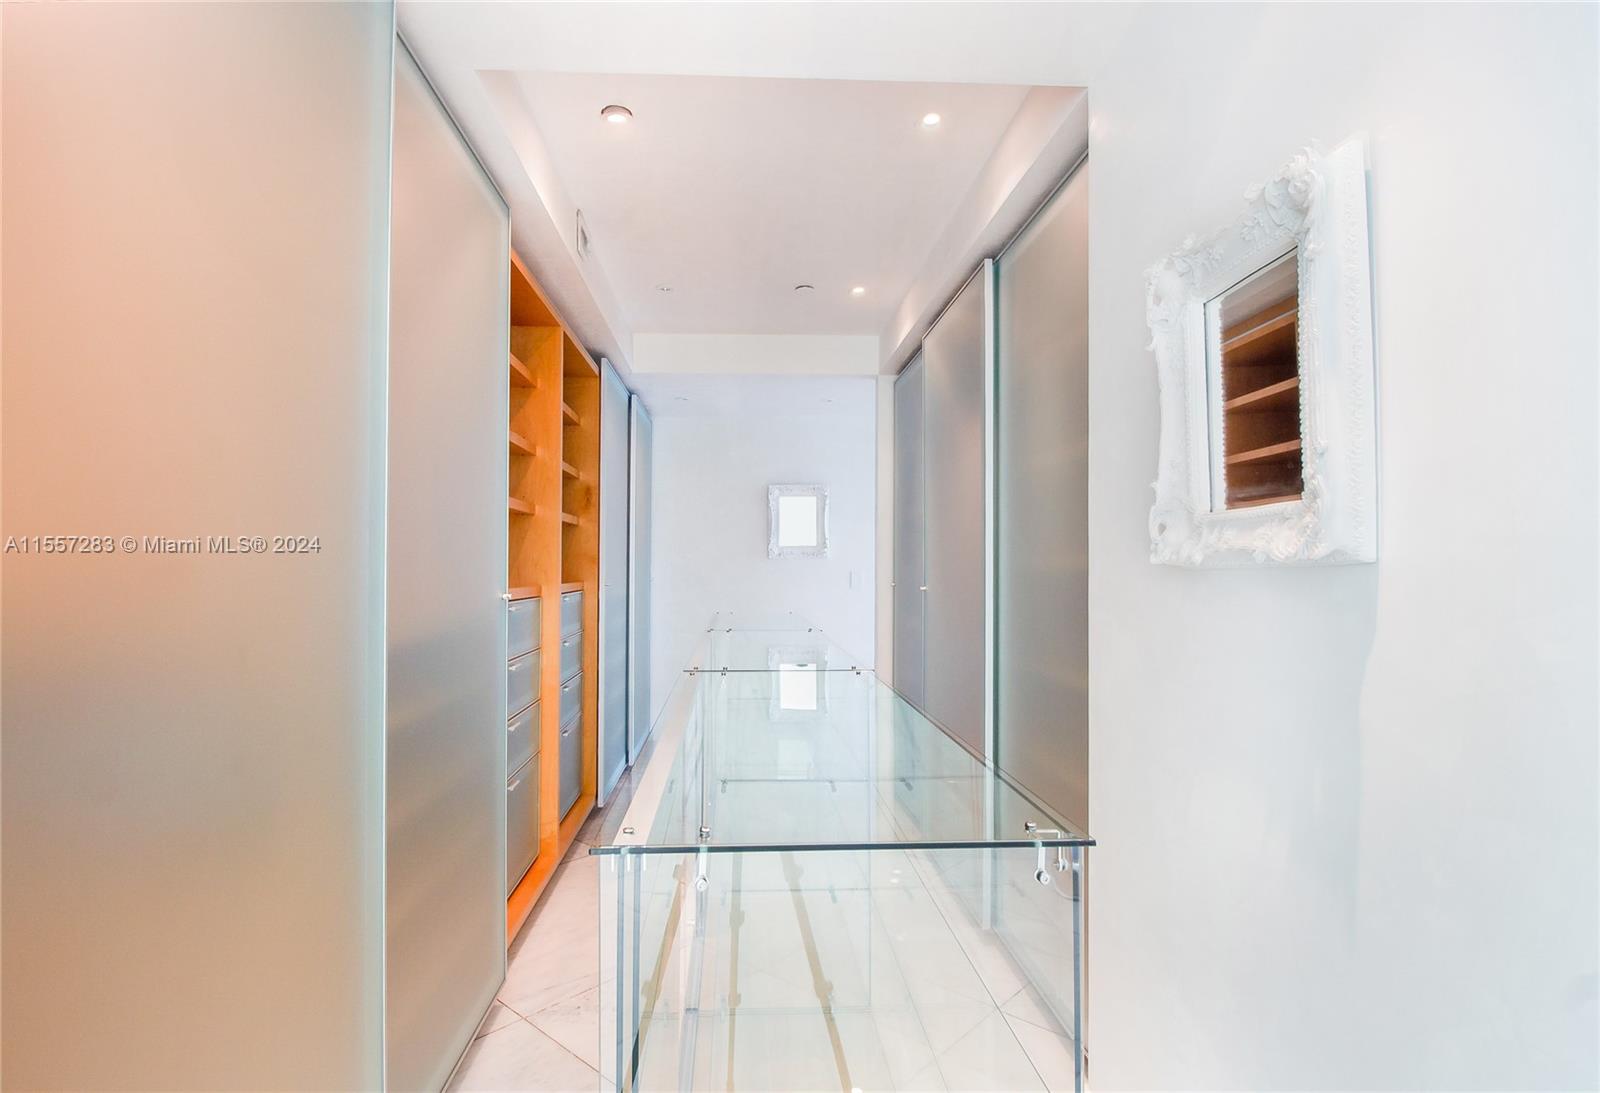 1643 Brickell Ave 2902, Miami, Florida 33129, 4 Bedrooms Bedrooms, ,5 BathroomsBathrooms,Residential,For Sale,1643 Brickell Ave 2902,A11557283